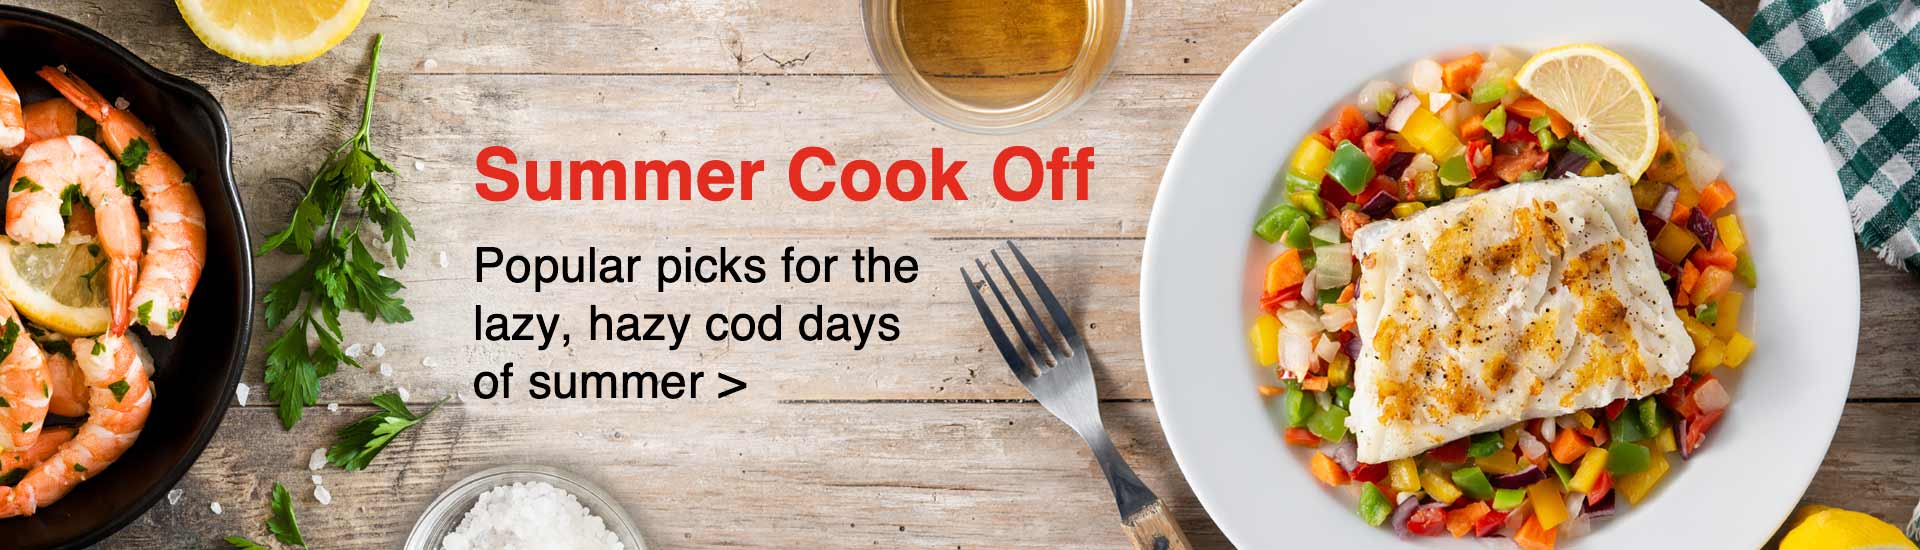 Summer Cook Off: Popular picks for the lazy, hazy cod days of summer